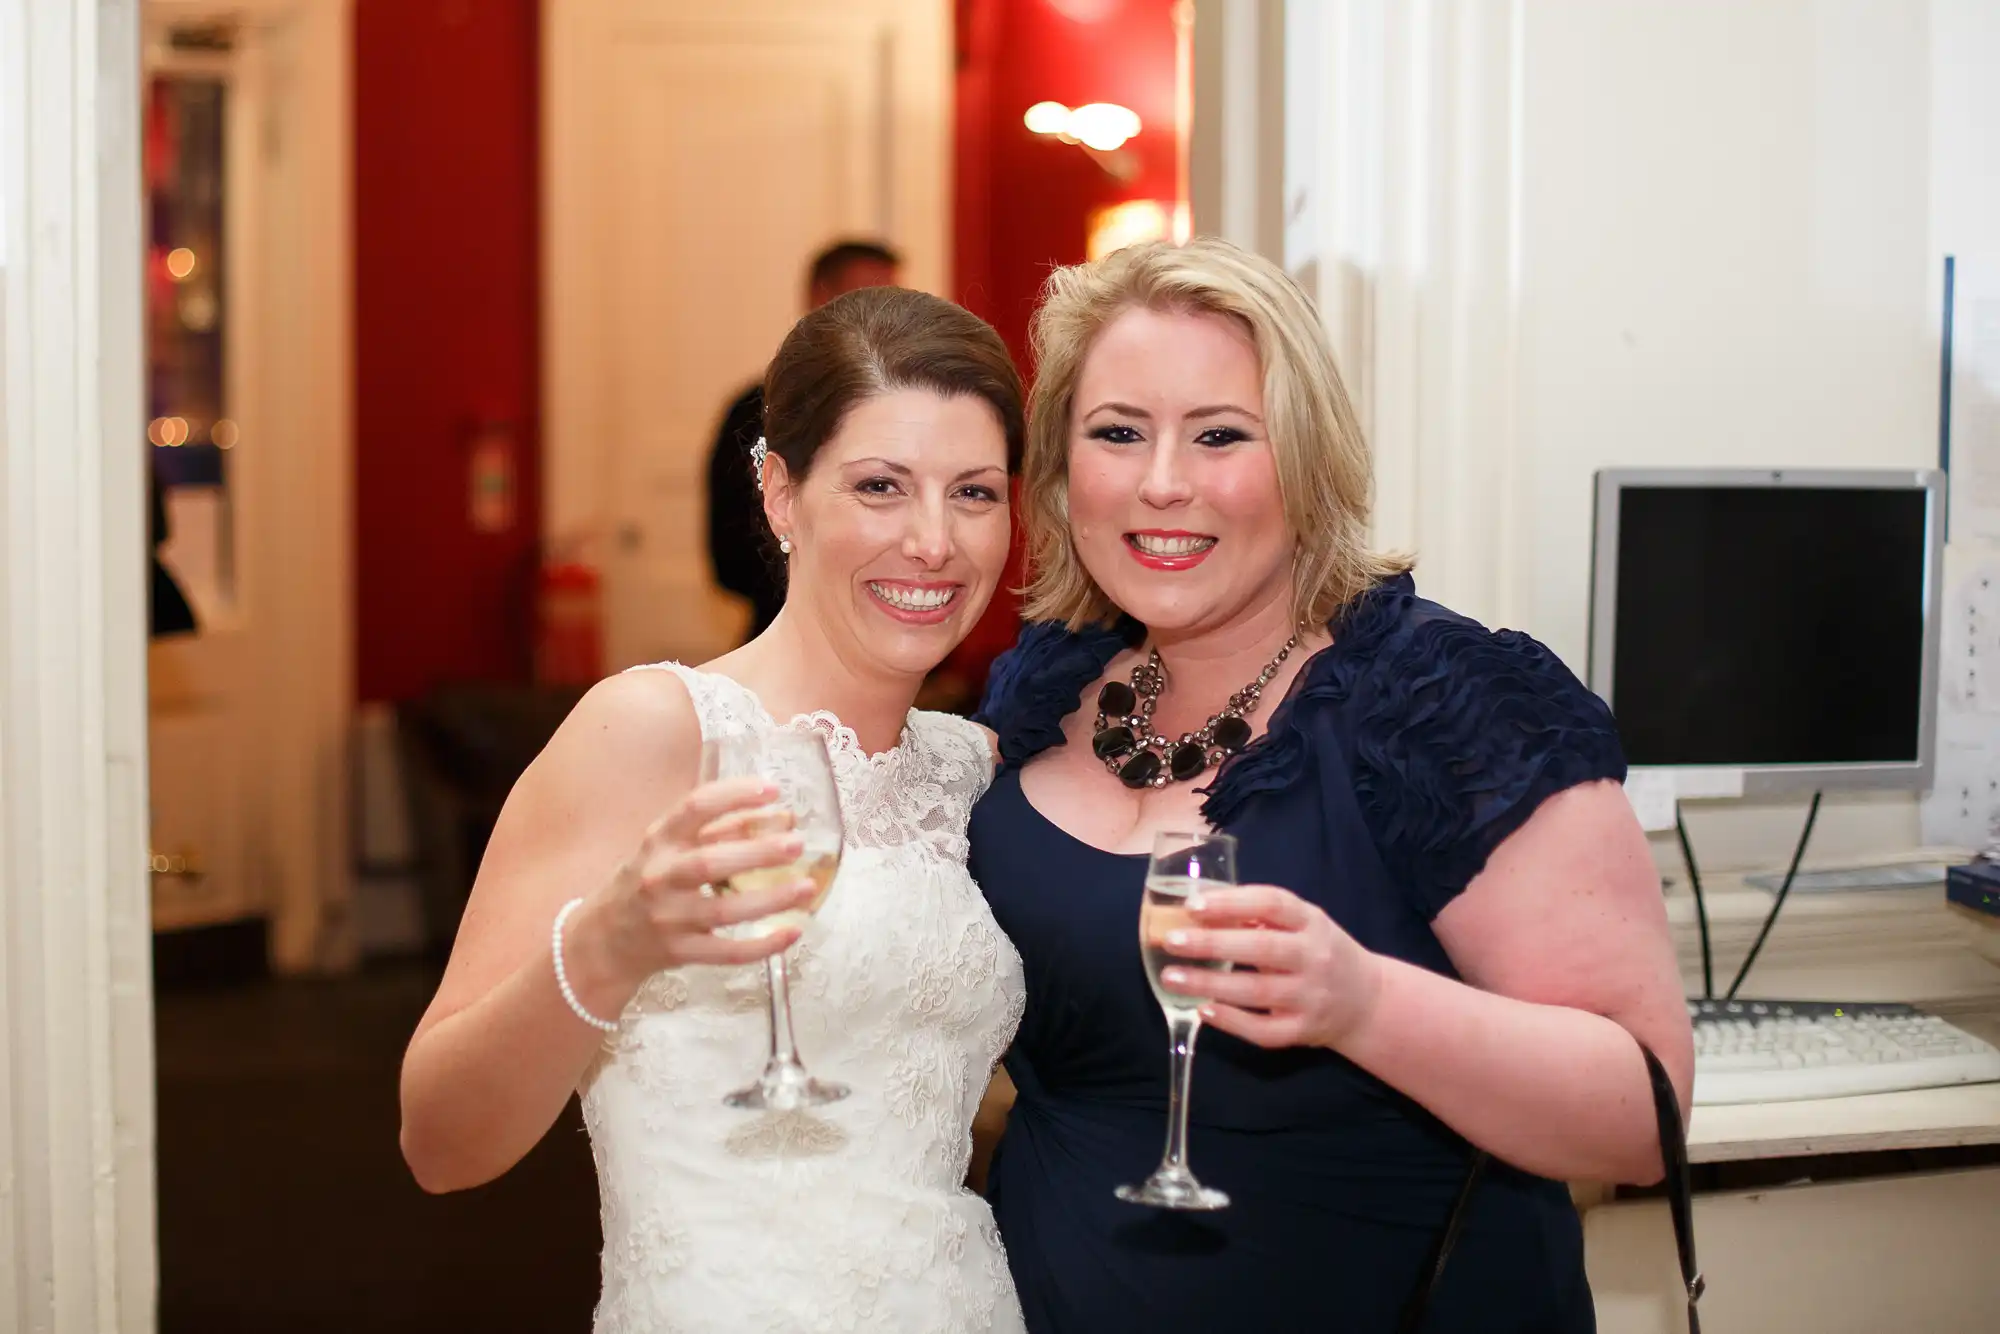 Two women smiling and toasting with champagne glasses at an indoor event, one dressed in a white wedding gown and the other in a dark blue dress.